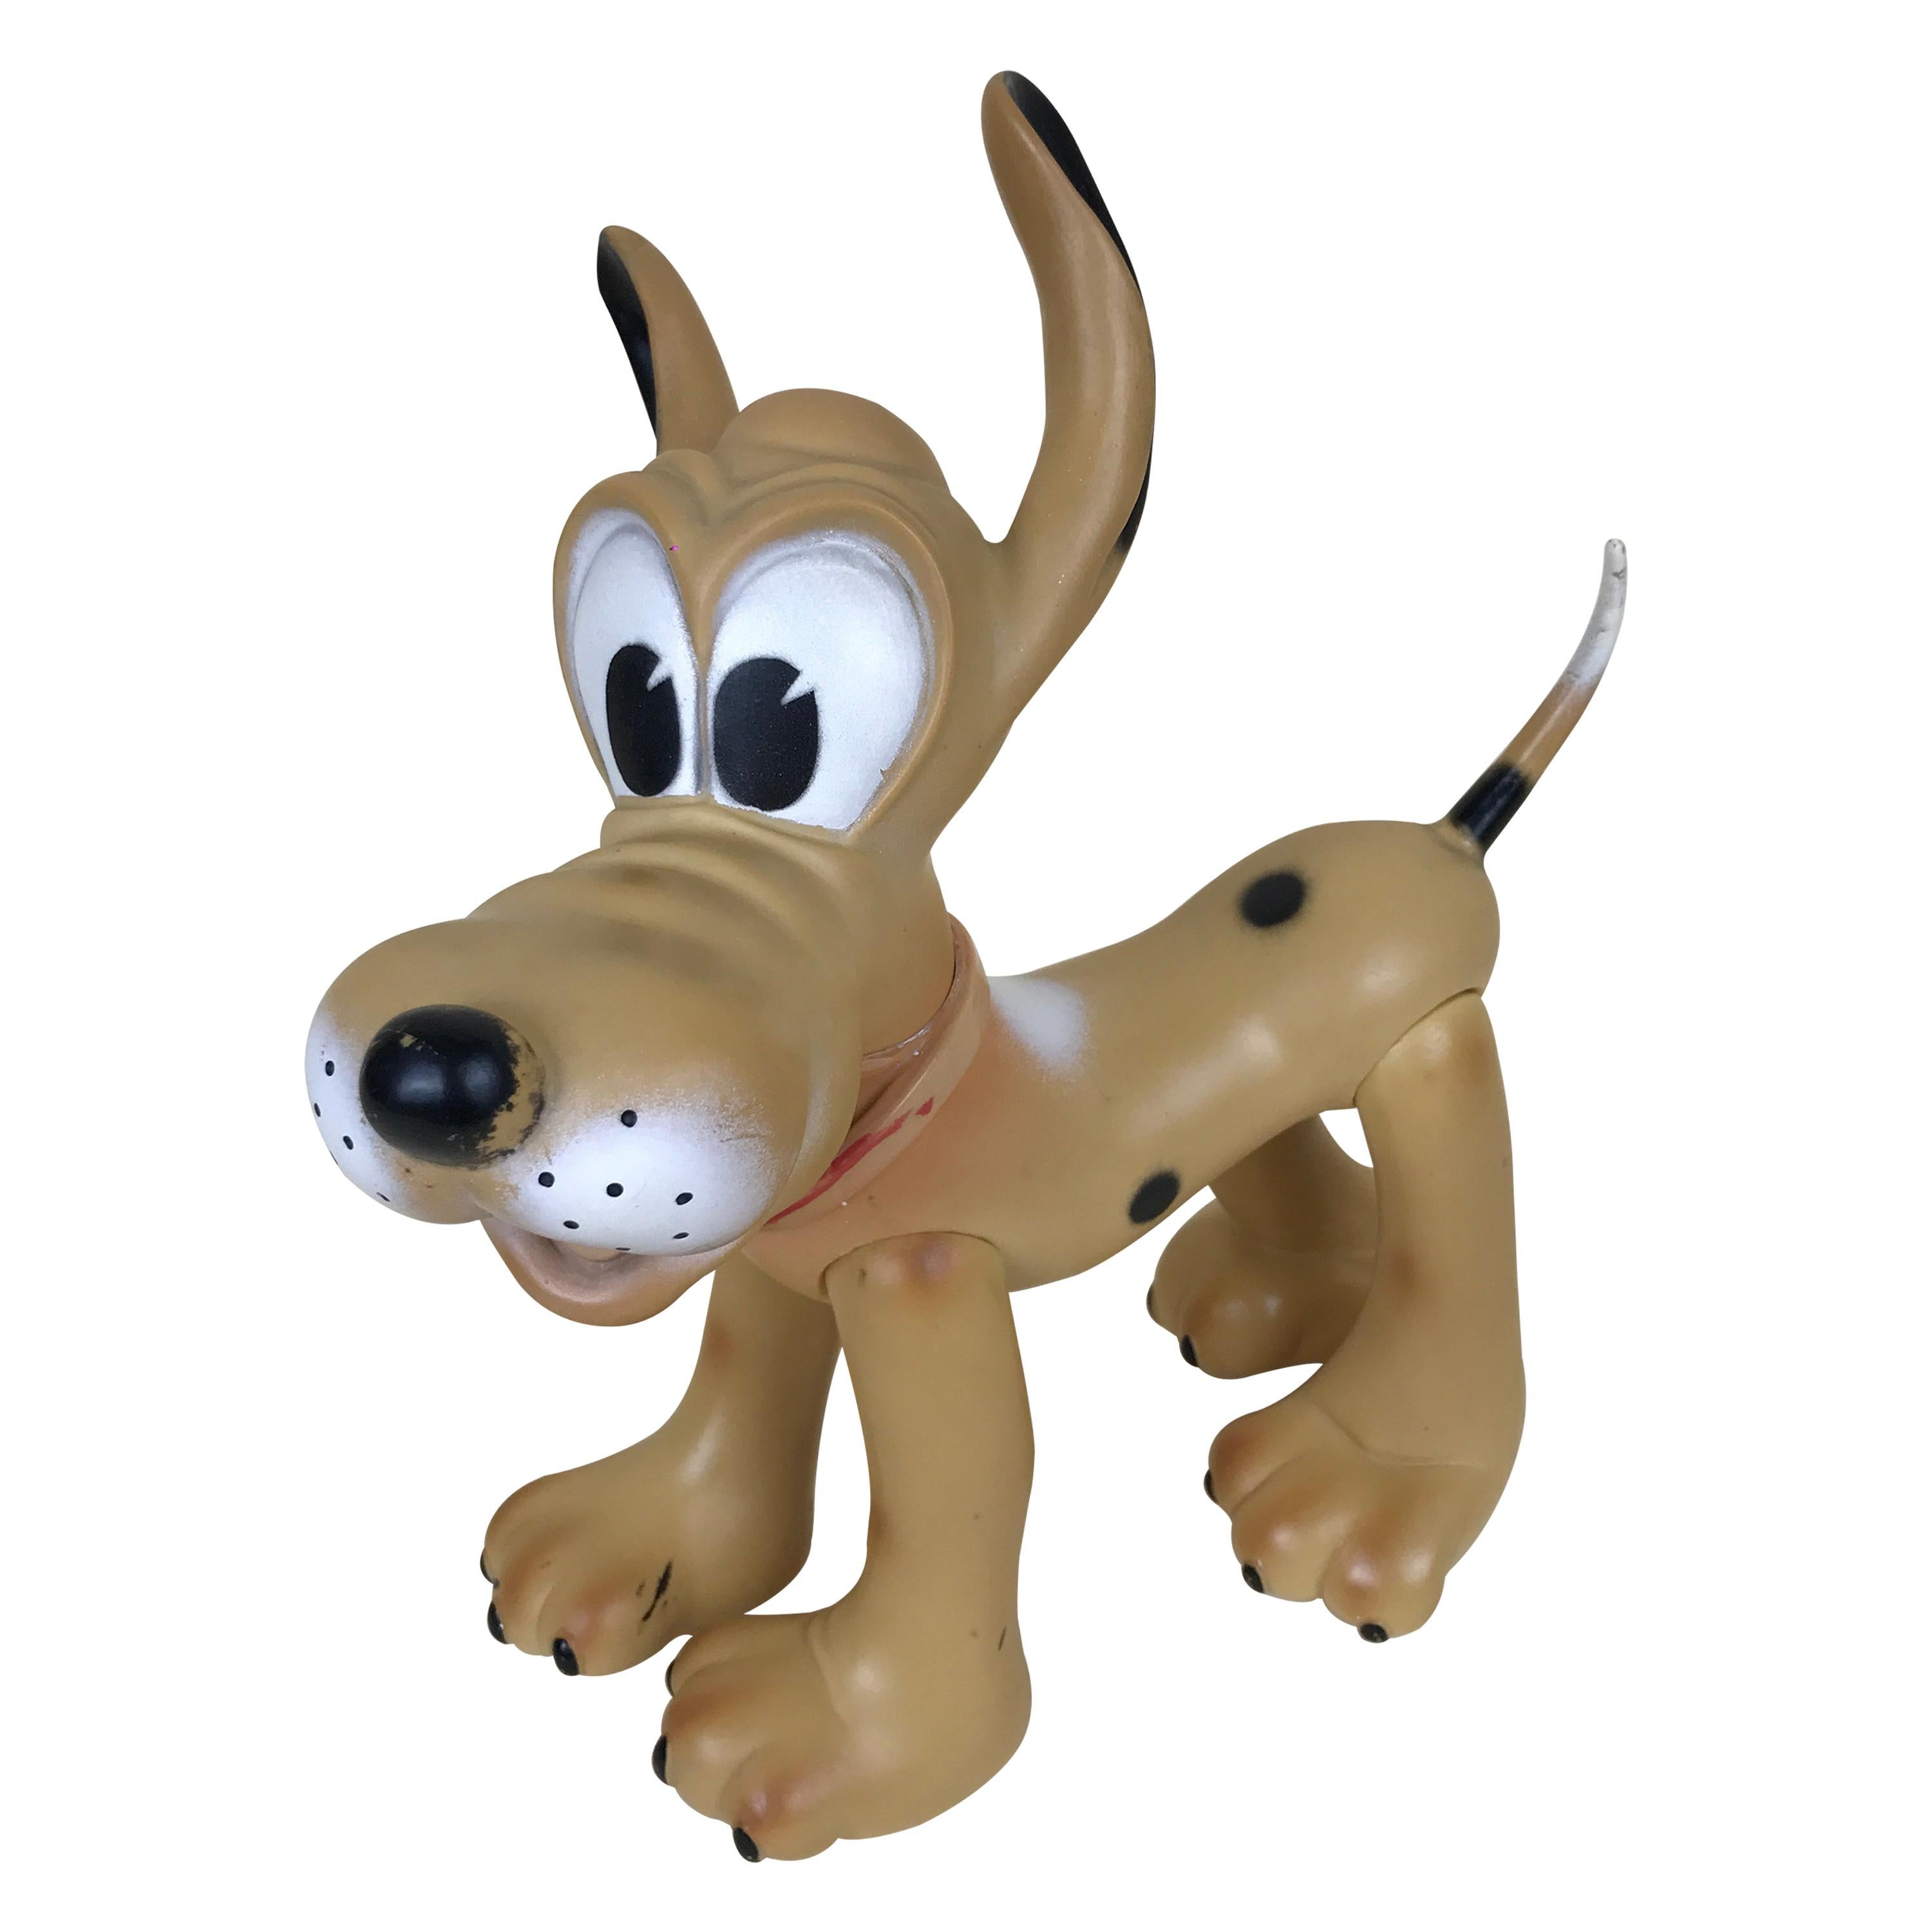 1960s Vintage Original Disney Pluto Rubber Squeak Toy Made in Italy For Sale